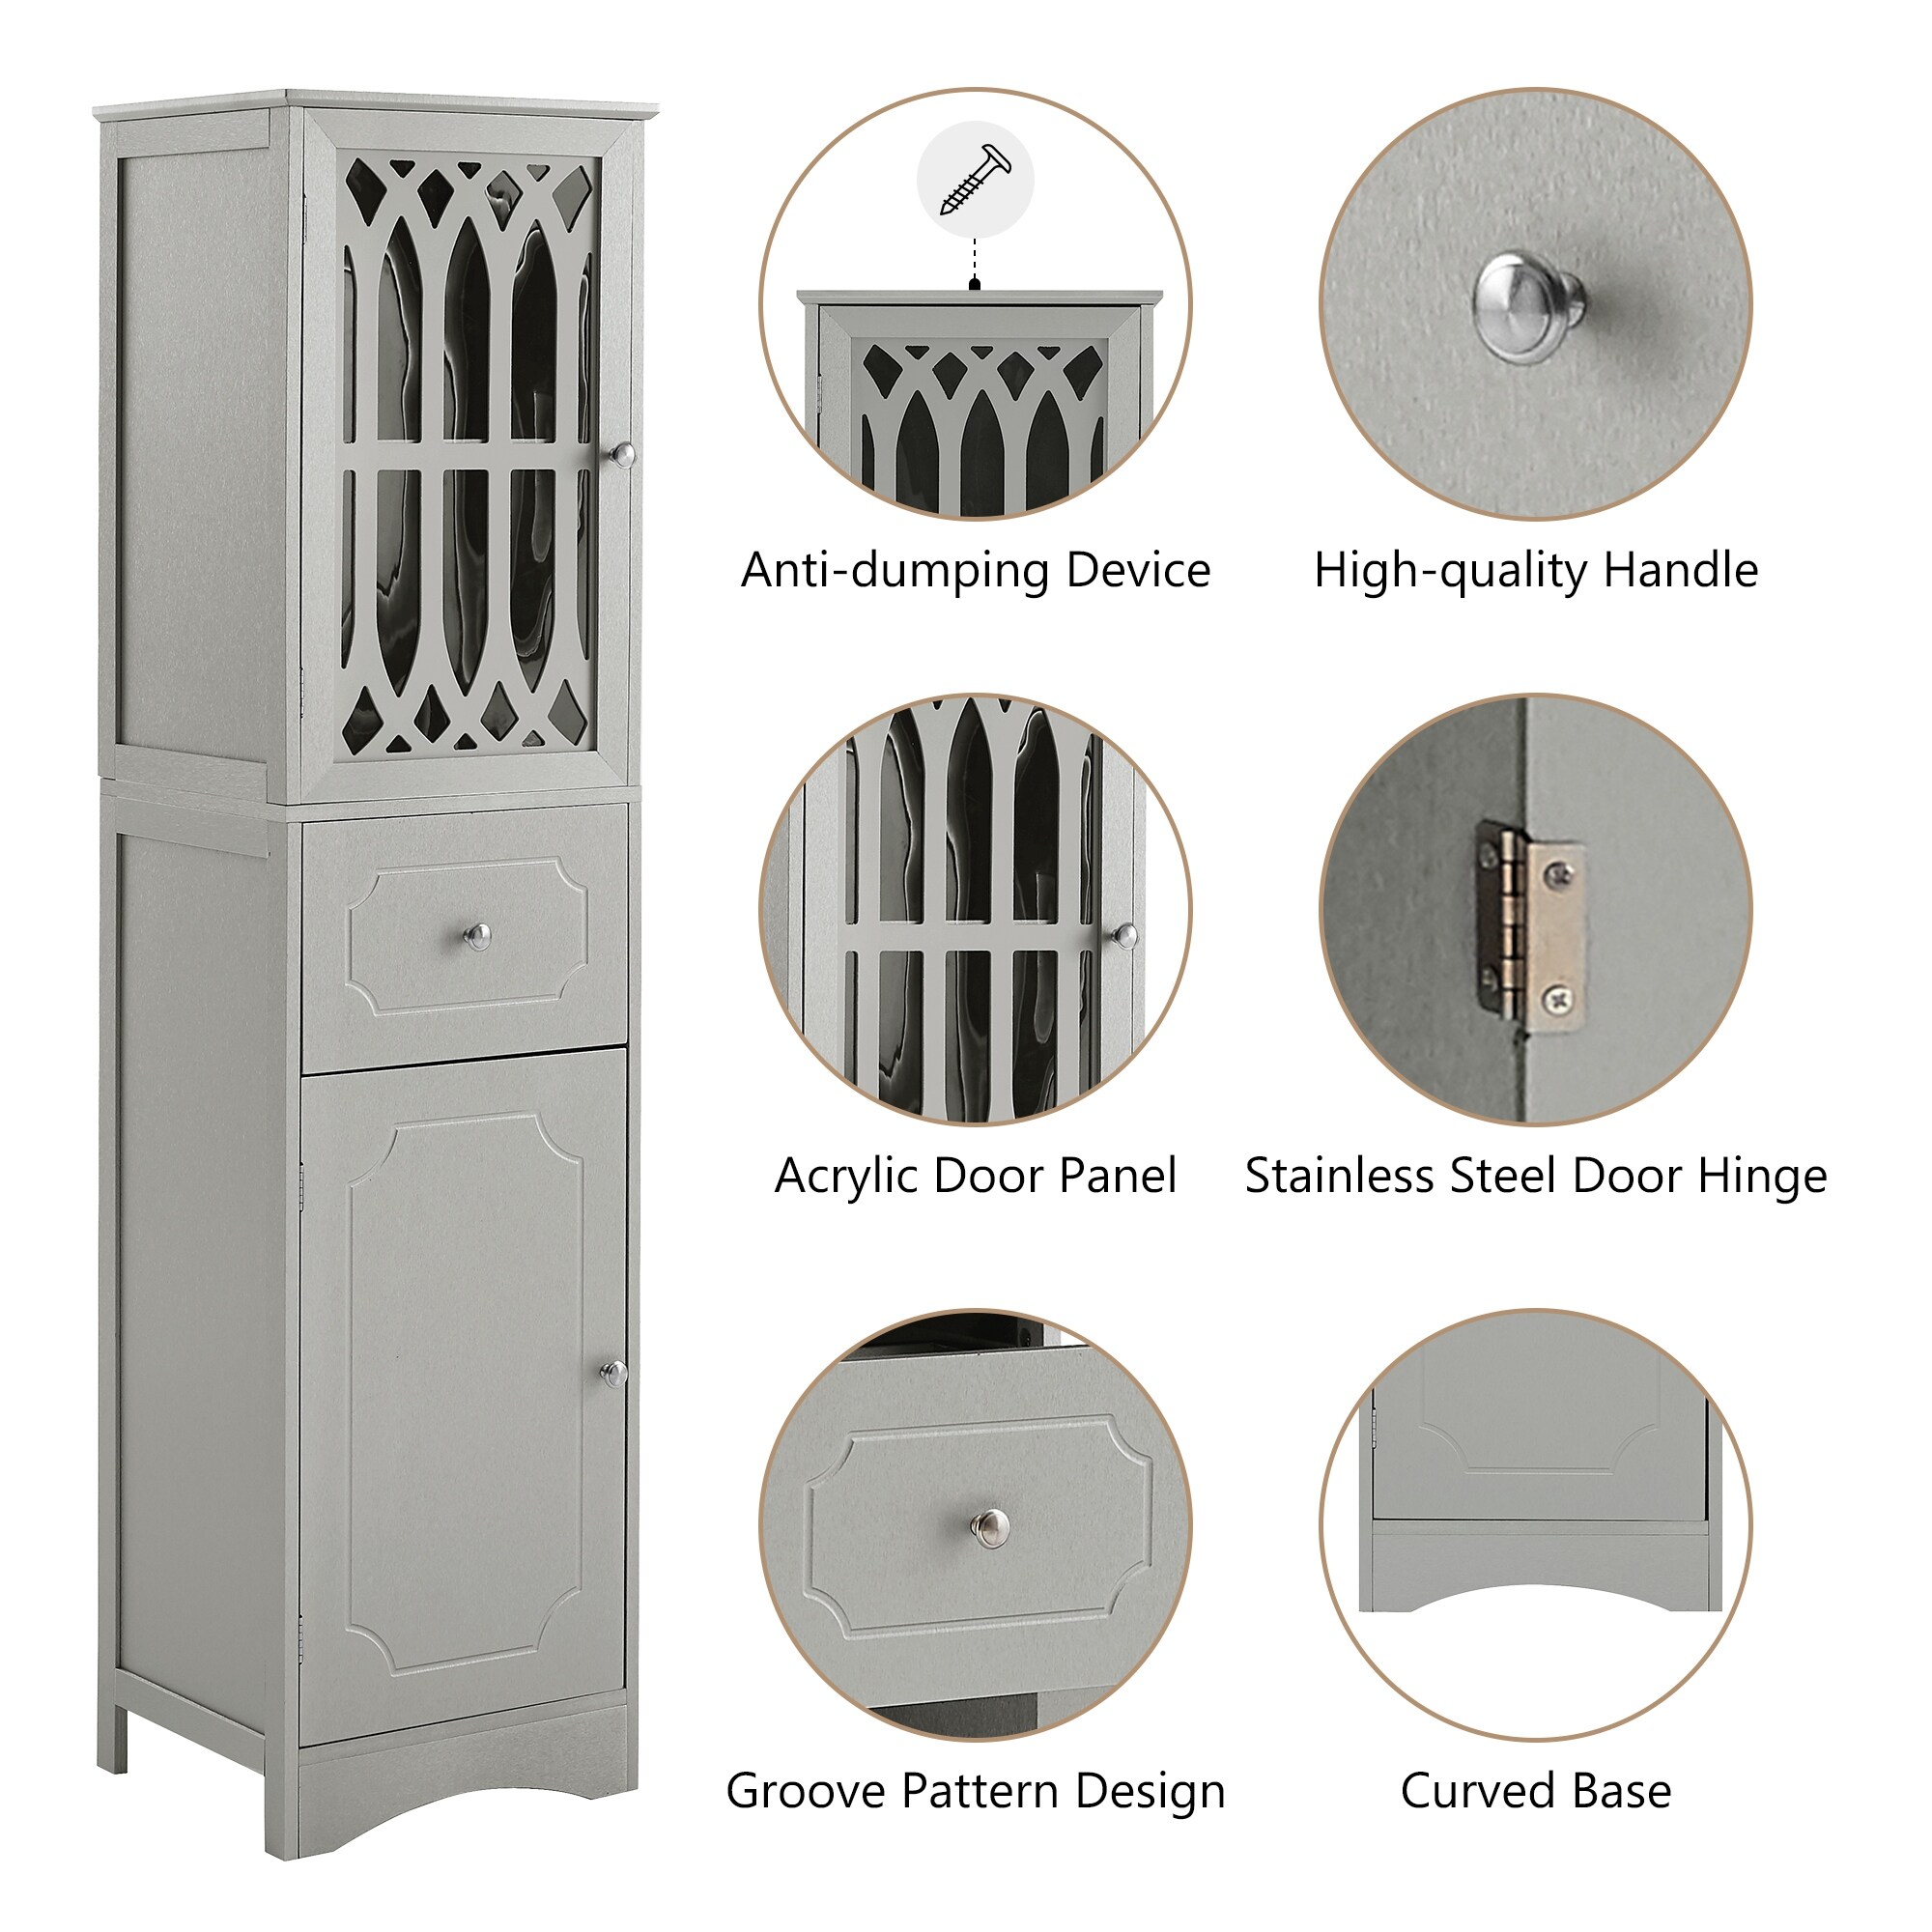 https://ak1.ostkcdn.com/images/products/is/images/direct/f8bf35f6335ee4b34a61af7dba3ecde65c1c72bb/Tiptiper-Tall-Bathroom-Cabinet-with-Cutout-Door%2C-Grey-Freestanding-Narrow-Storage-with-Adjustable-Shelf%2C-Anti-dumping-Device.jpg